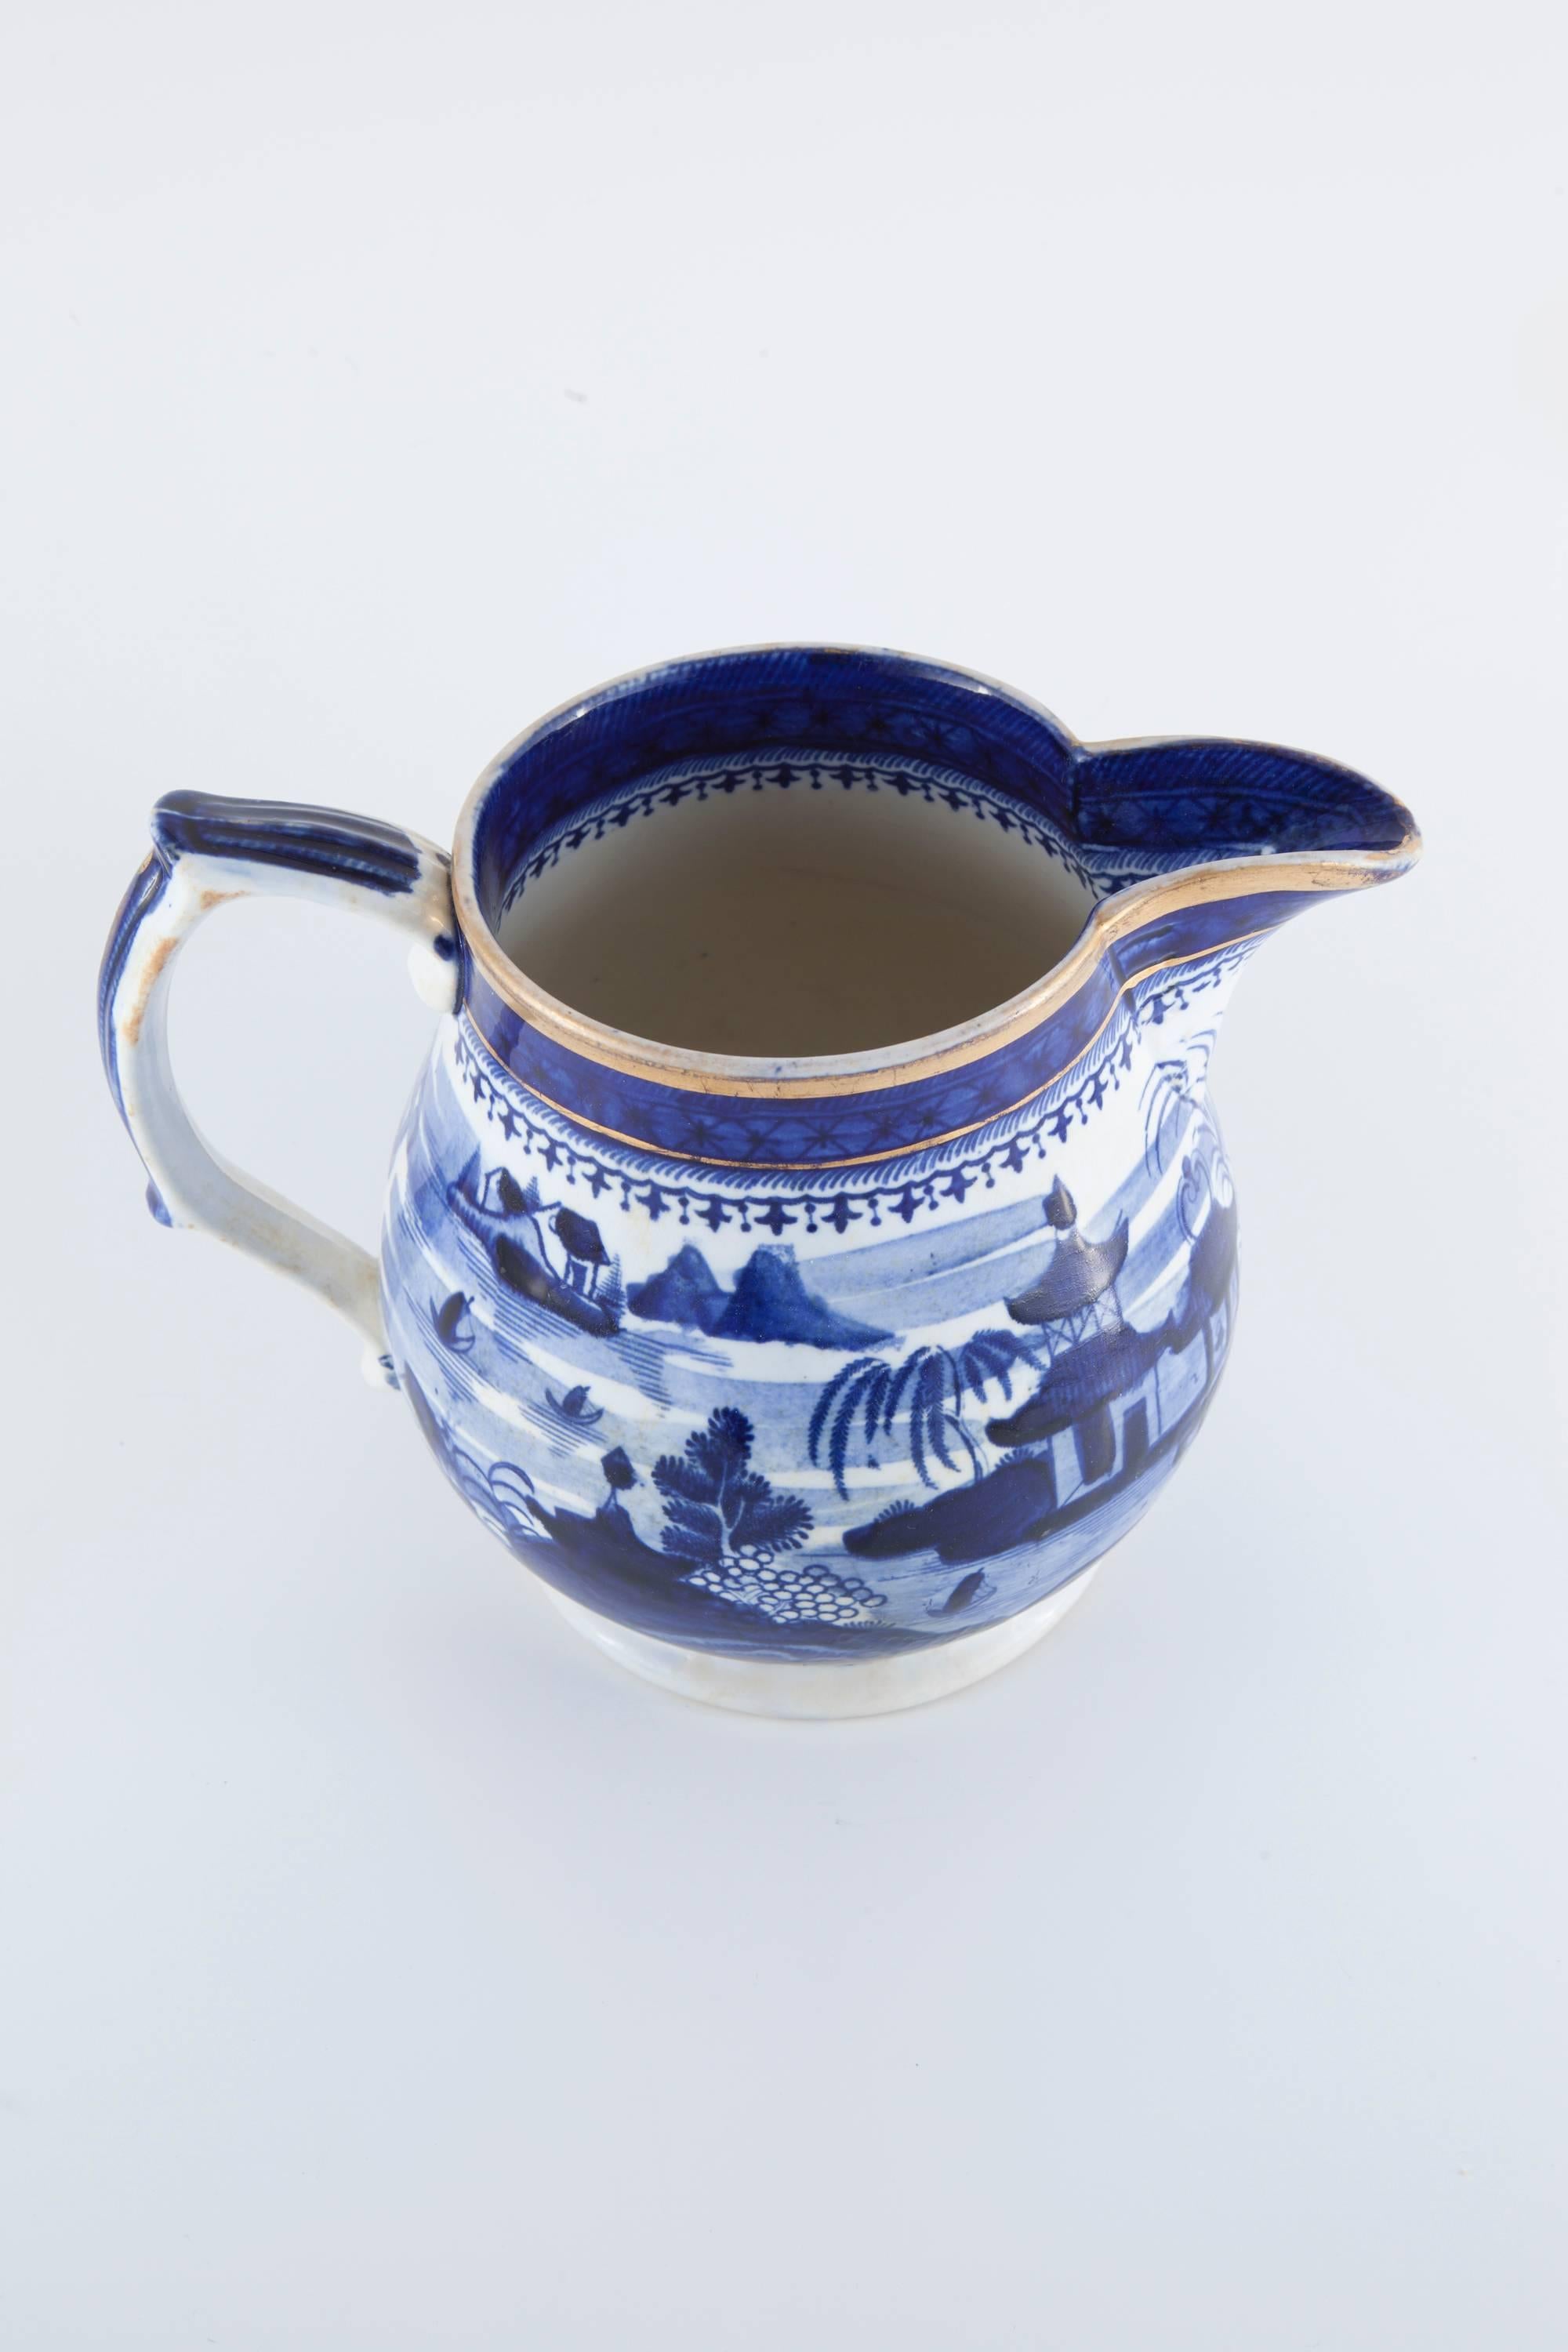 Salopian ware was made by the Caughley factory of England during the 18th century. The early pieces were blue and white with some colored decorations. Salopian ware made by Caughley, from about 1772 to 1799, was the first porcelain to be made in